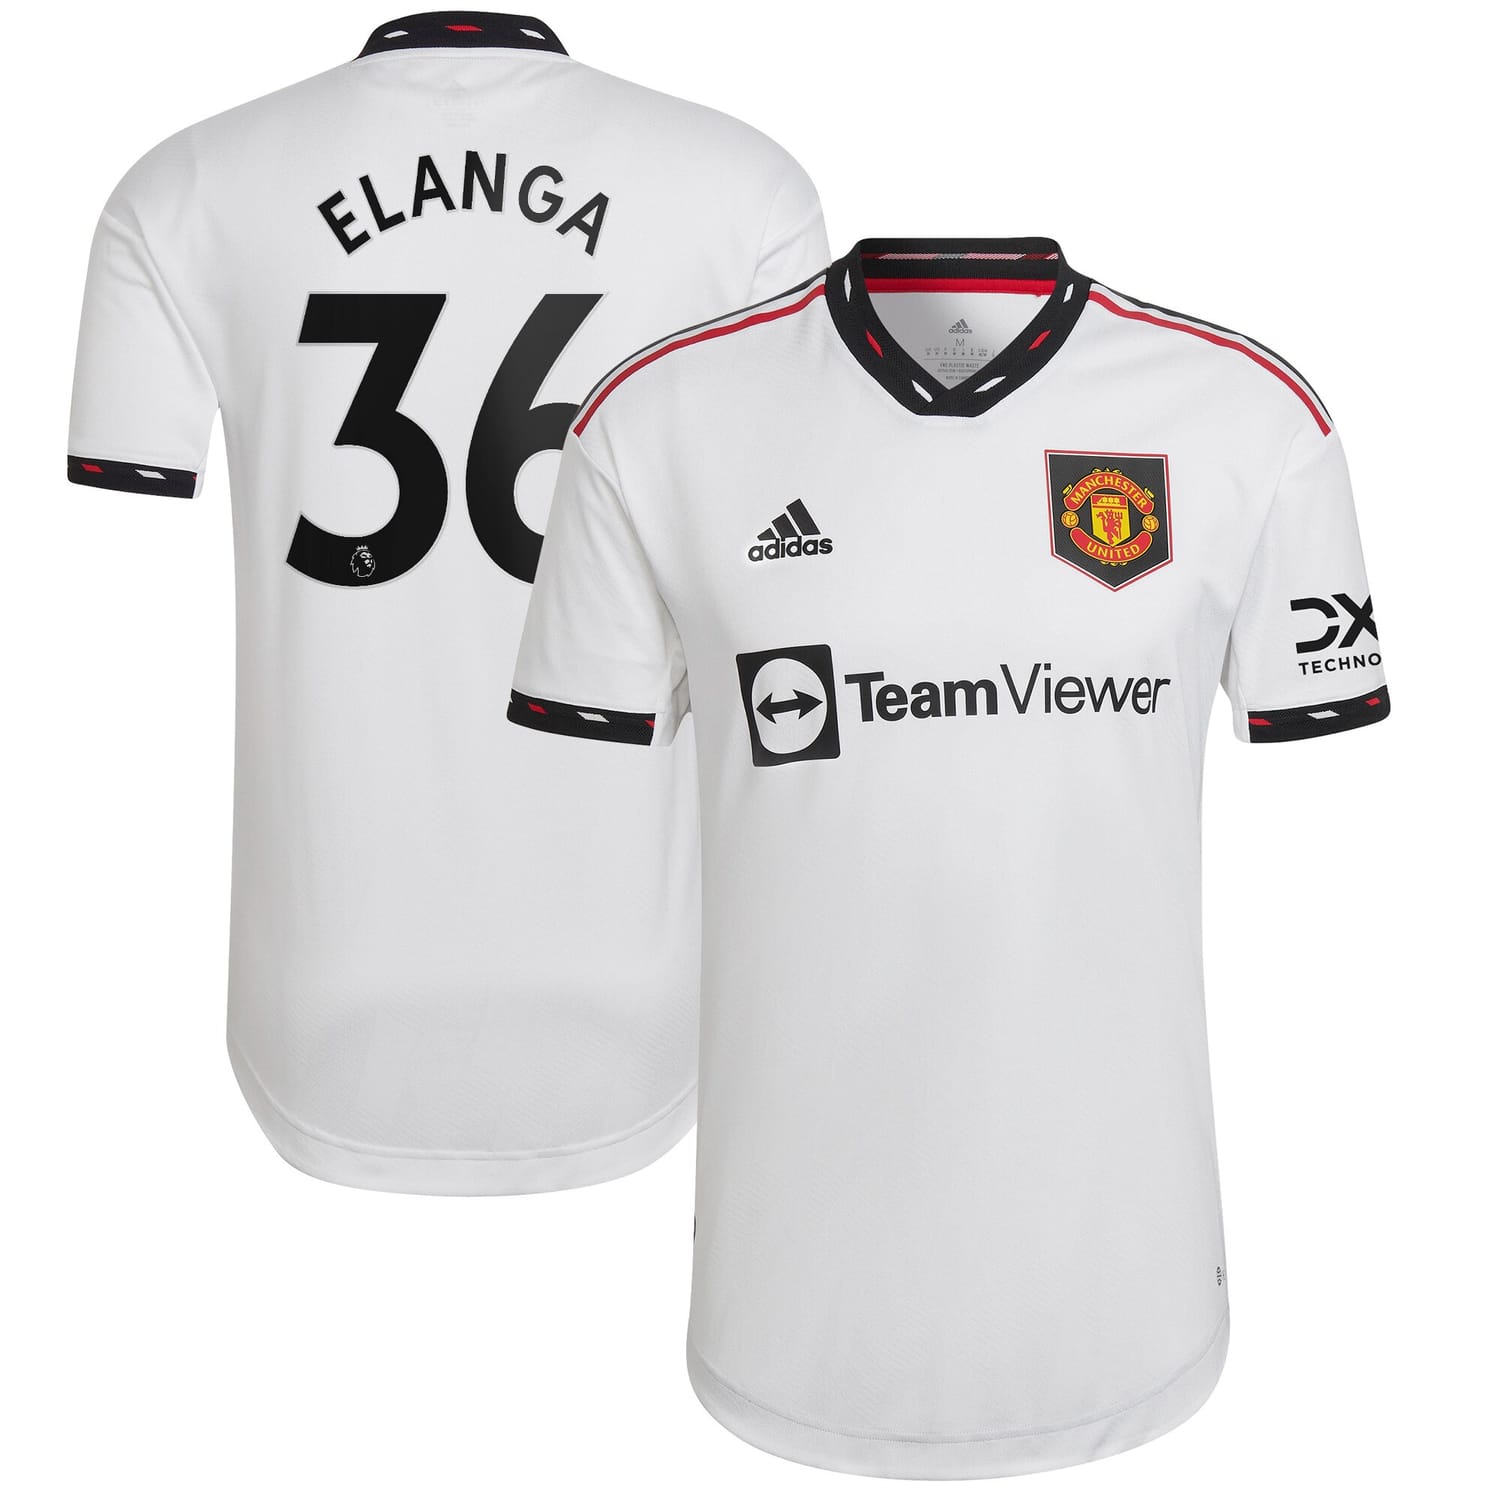 Premier League Manchester United Away Authentic Jersey Shirt 2022-23 player Anthony Elanga 36 printing for Men